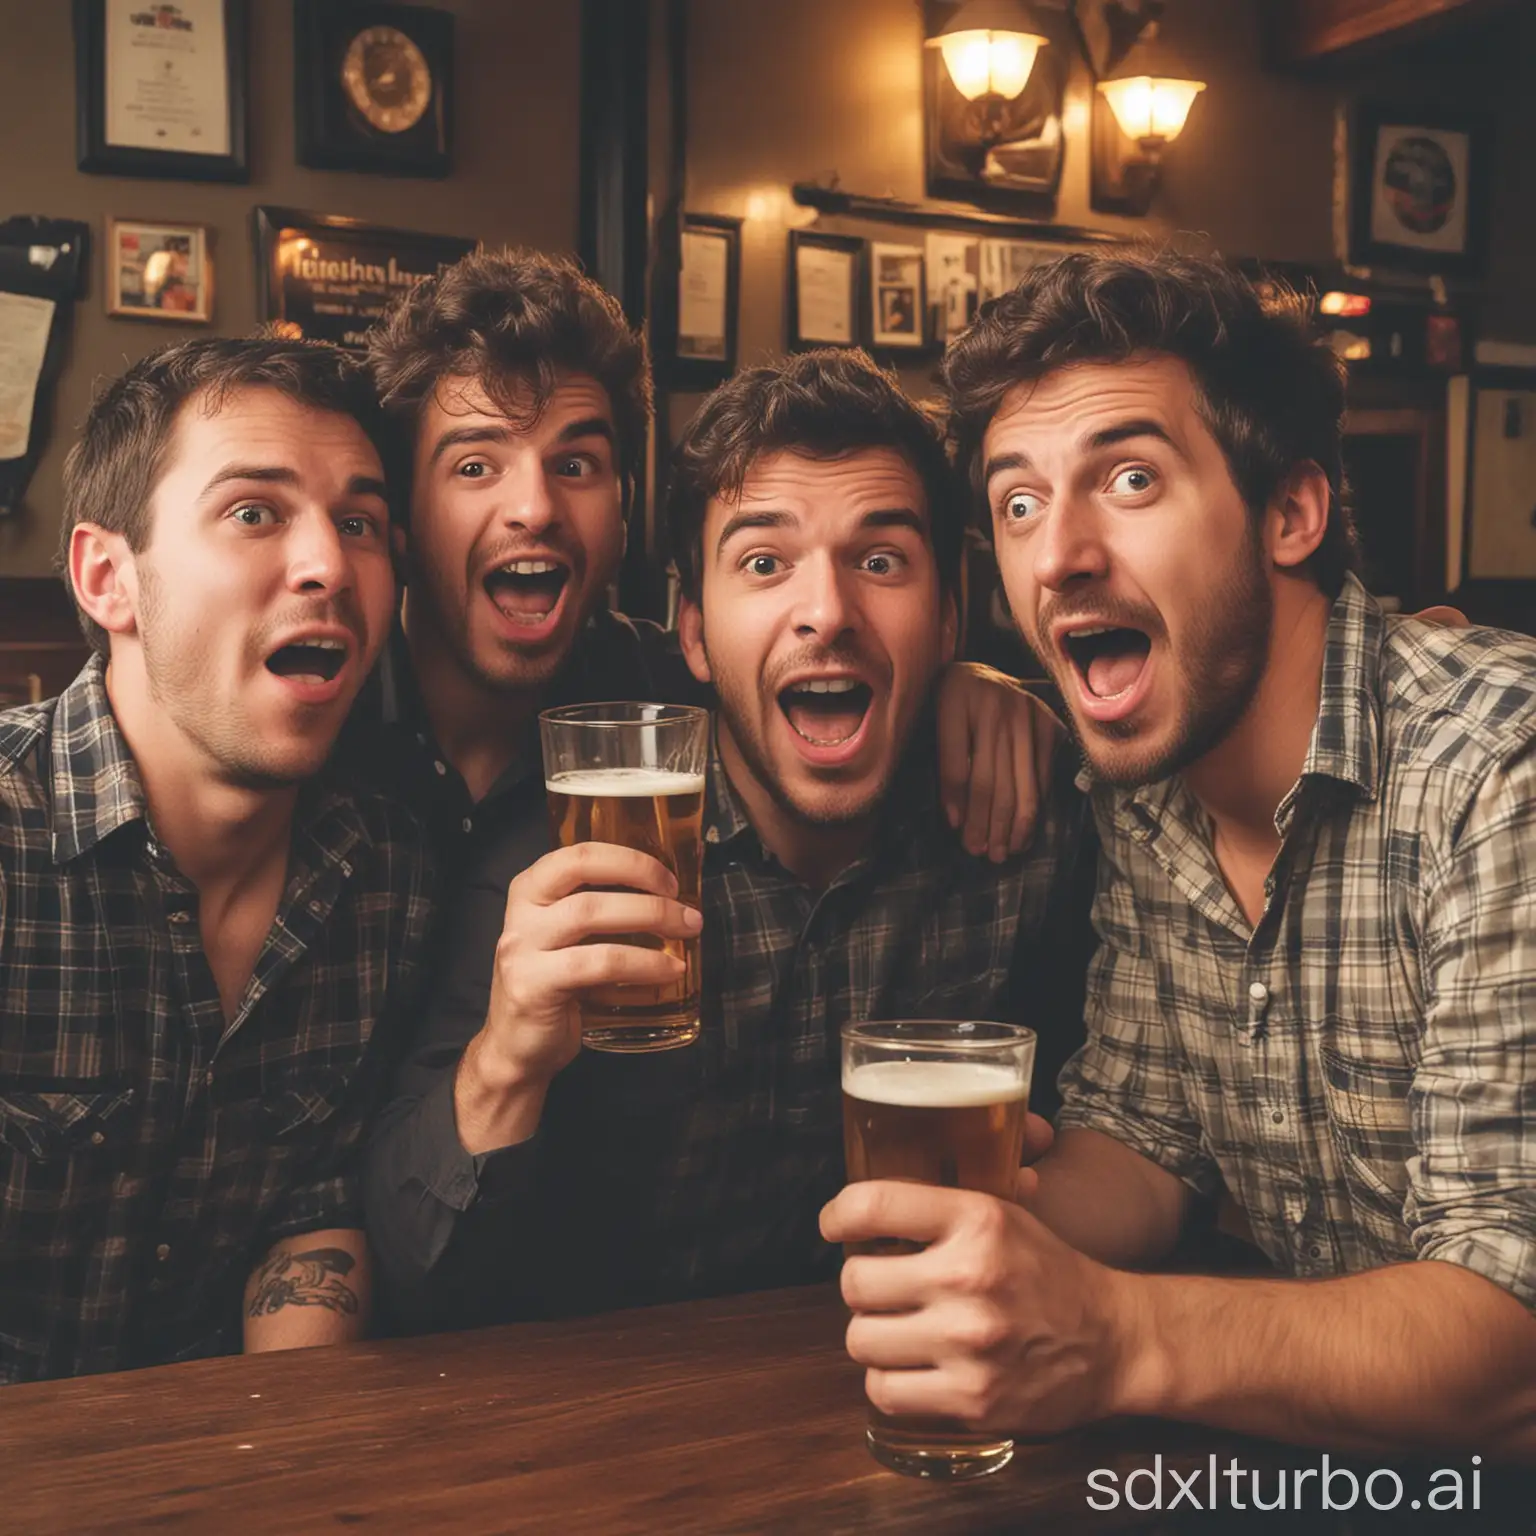 Group-of-Friends-Enjoying-a-Lively-Evening-in-a-Cozy-Pub